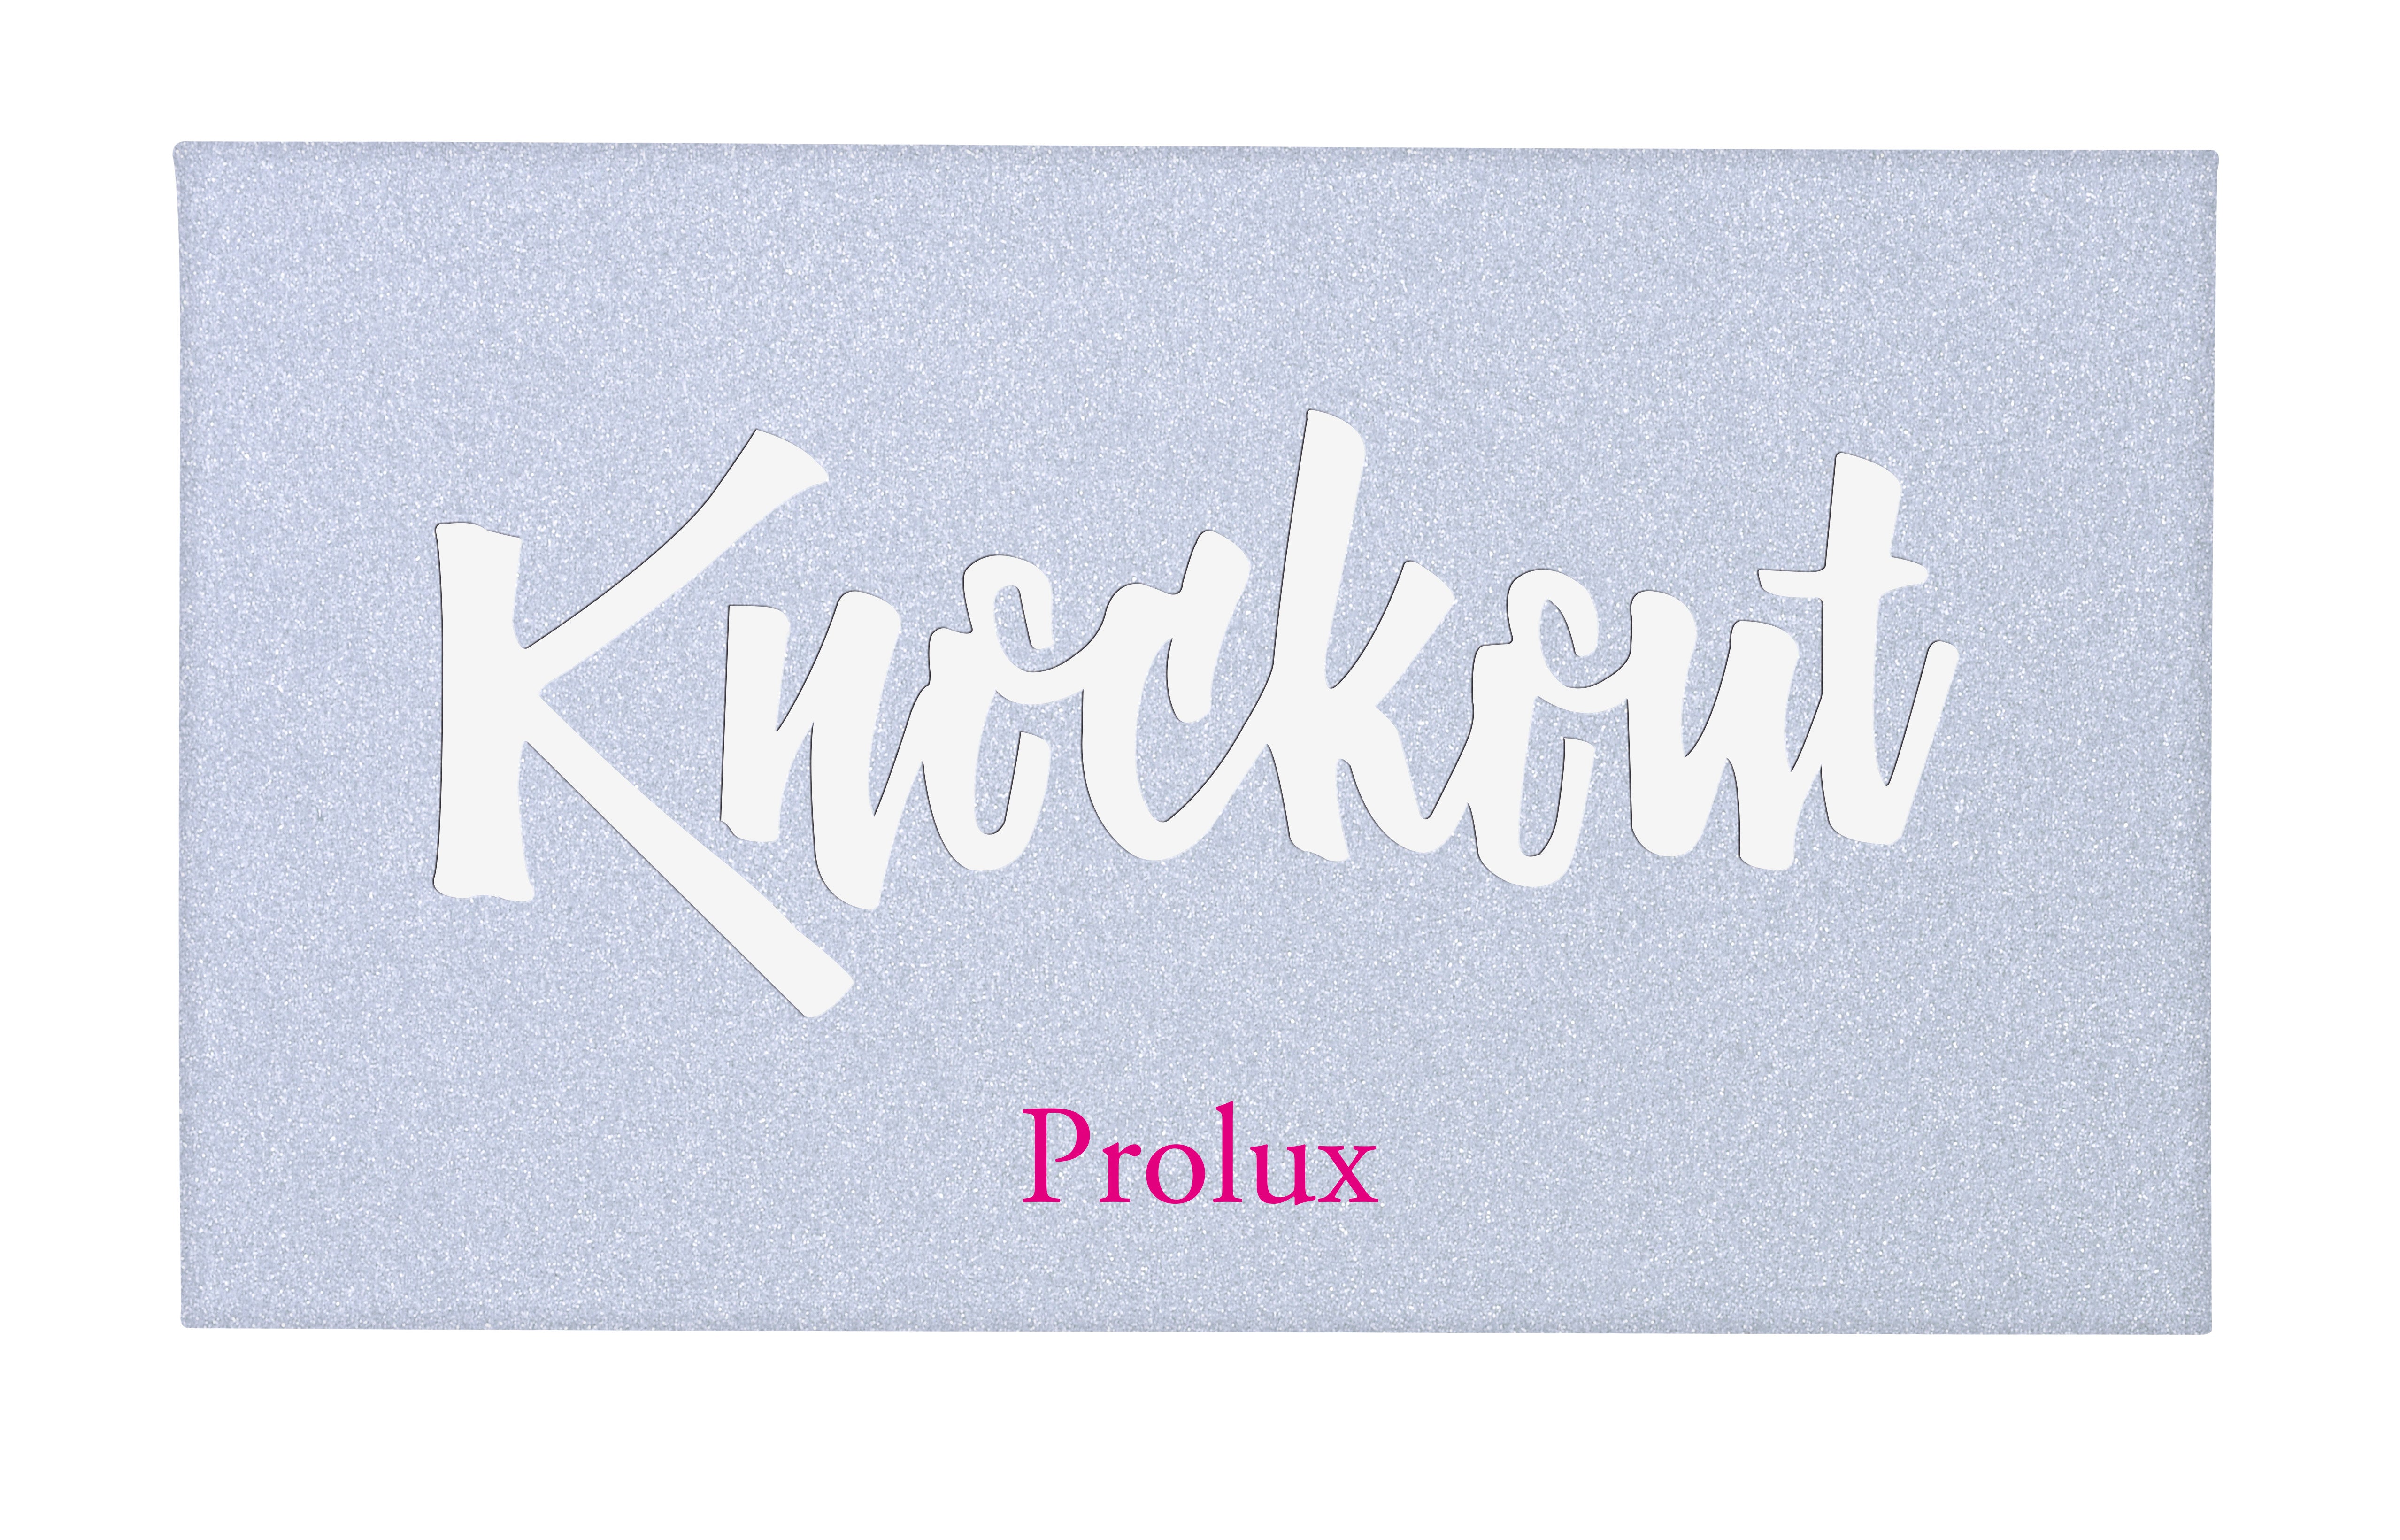 Knockout Eyeshadow Palette